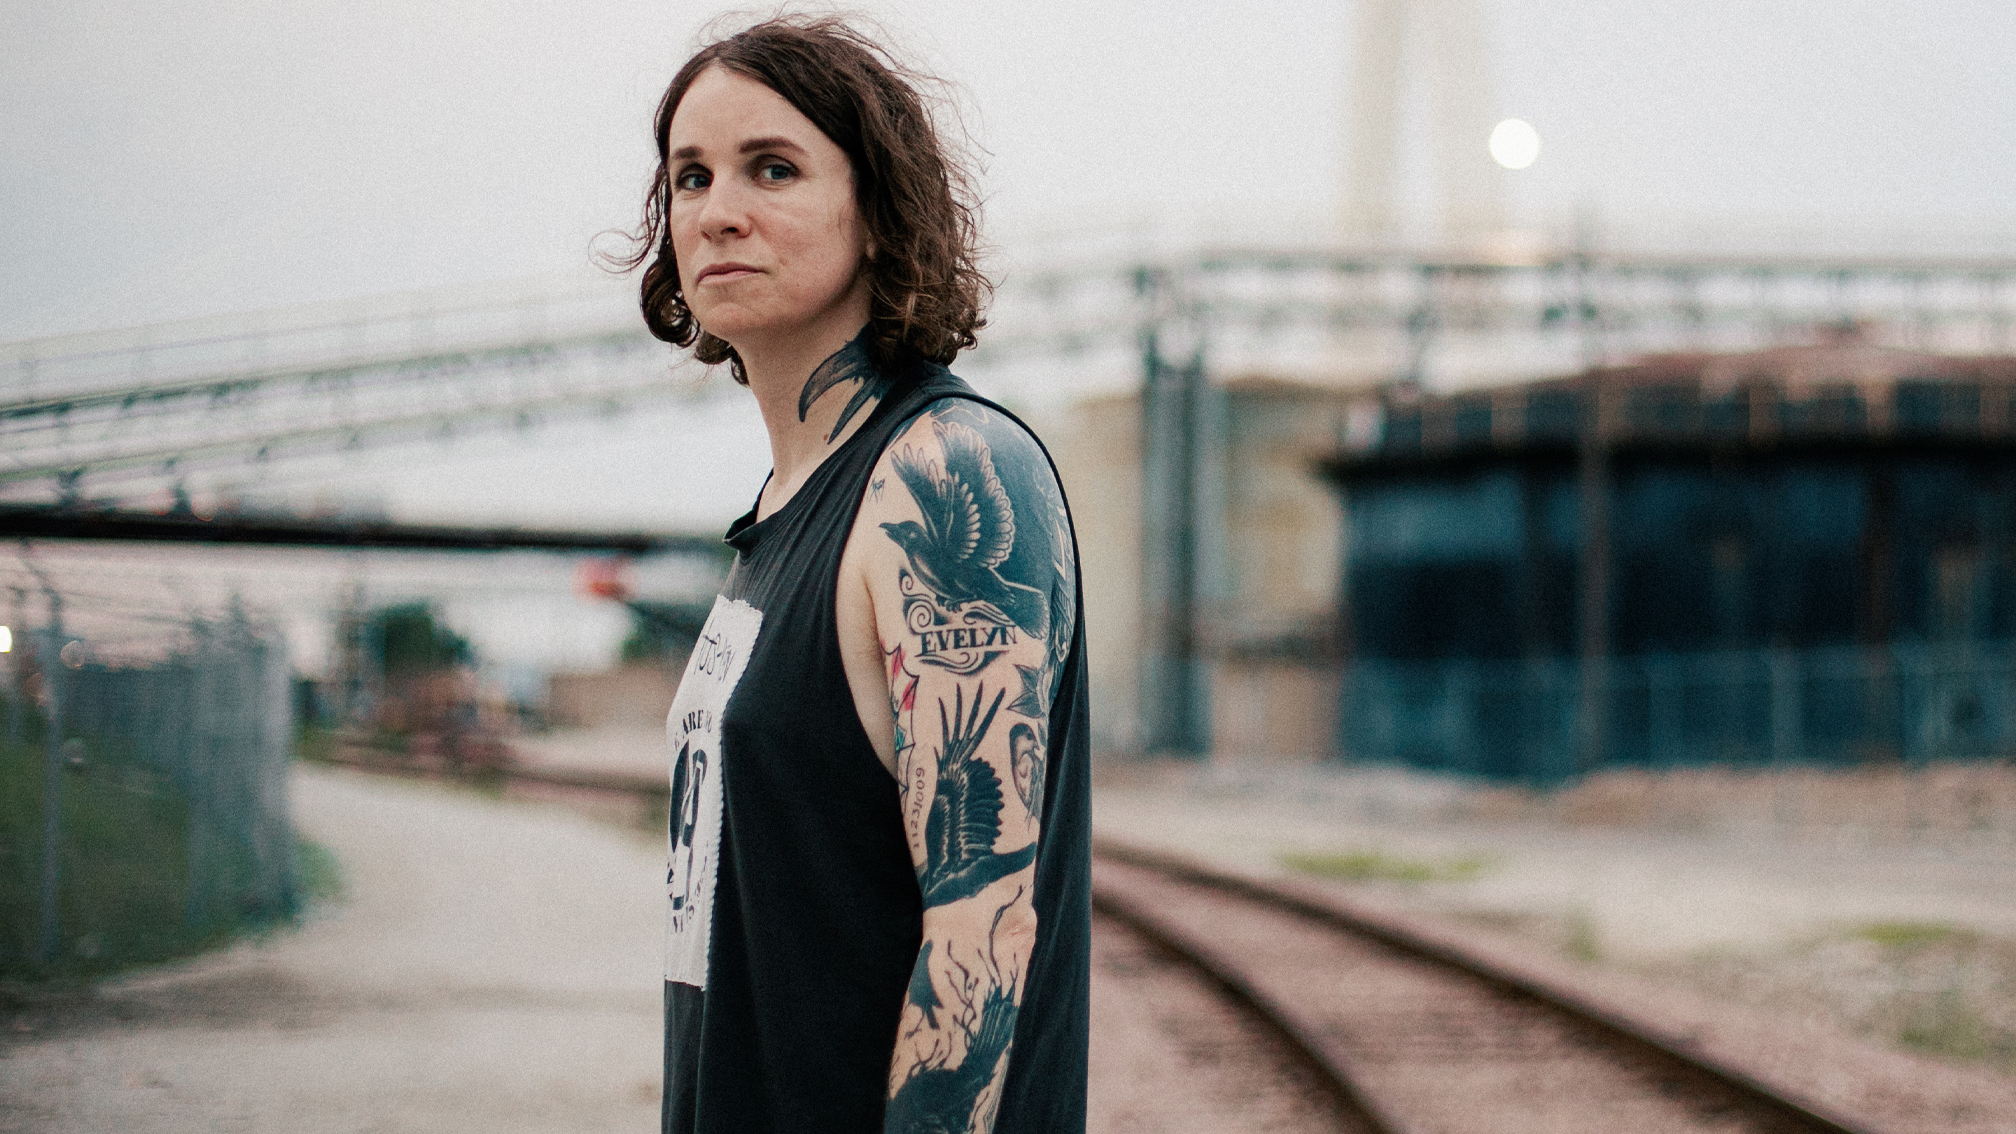 VIDEO: Against Me!'s Laura Jane Grace Gets Her Own Reality Show